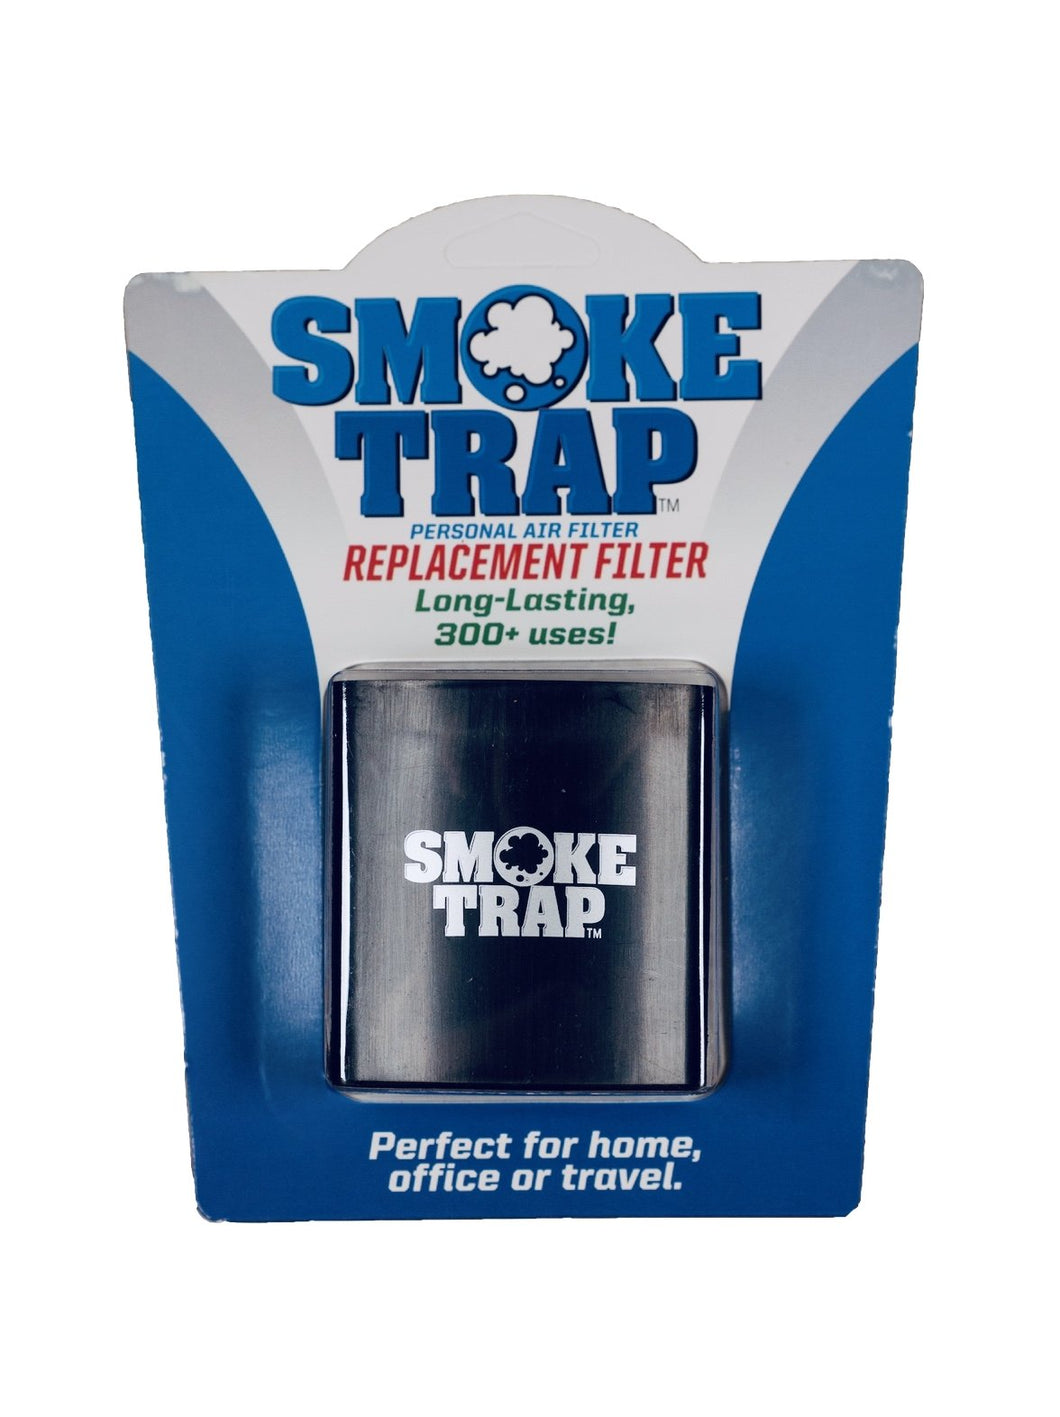 Introducing Smoke Trap +  The Newest Personal Air Filter By Smoke Trap 